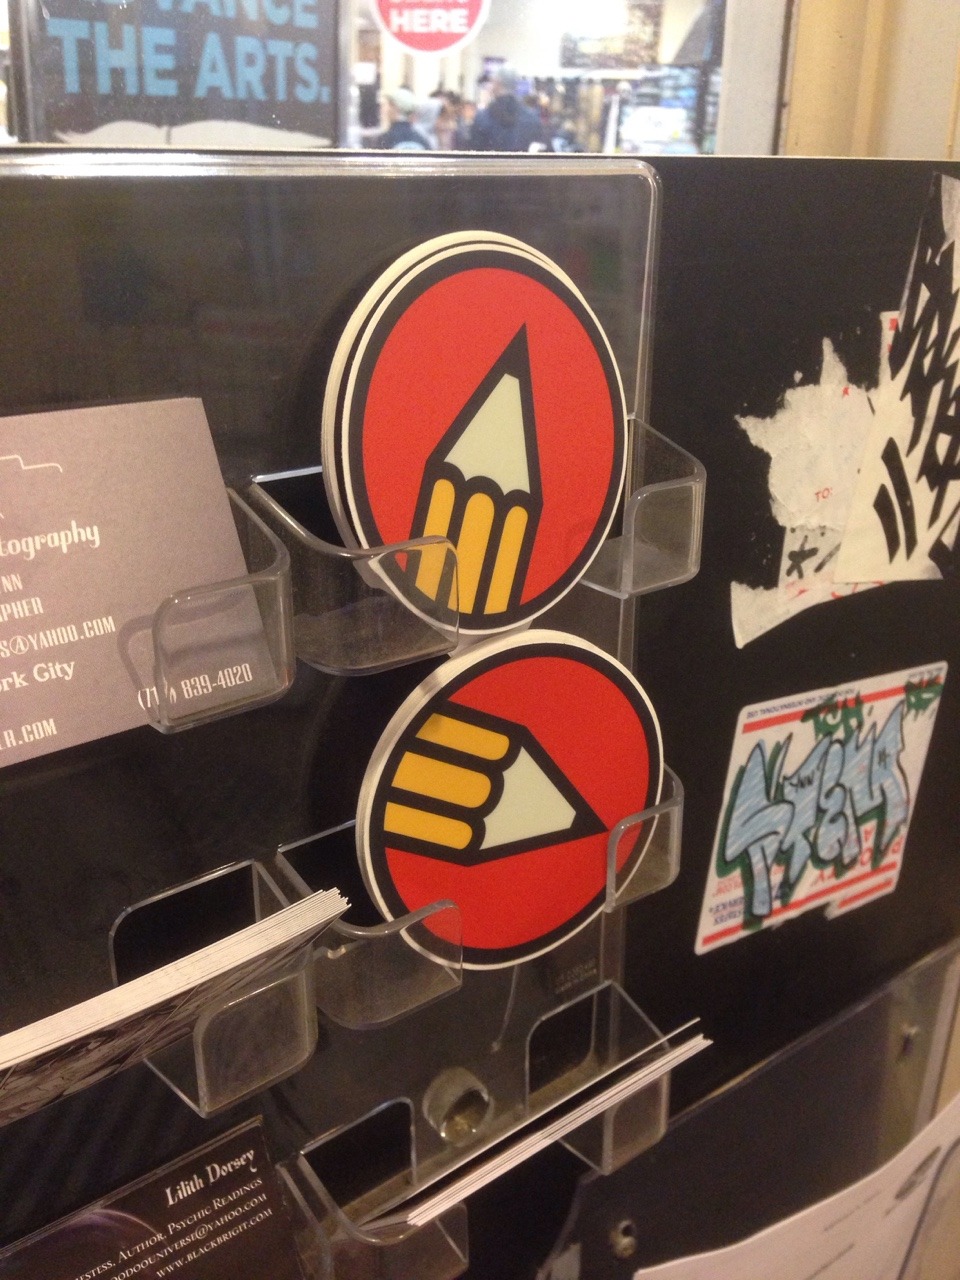 Sticker drop at Blick Art Materials on Bond St, New York, NY 10012 Take only what you need!